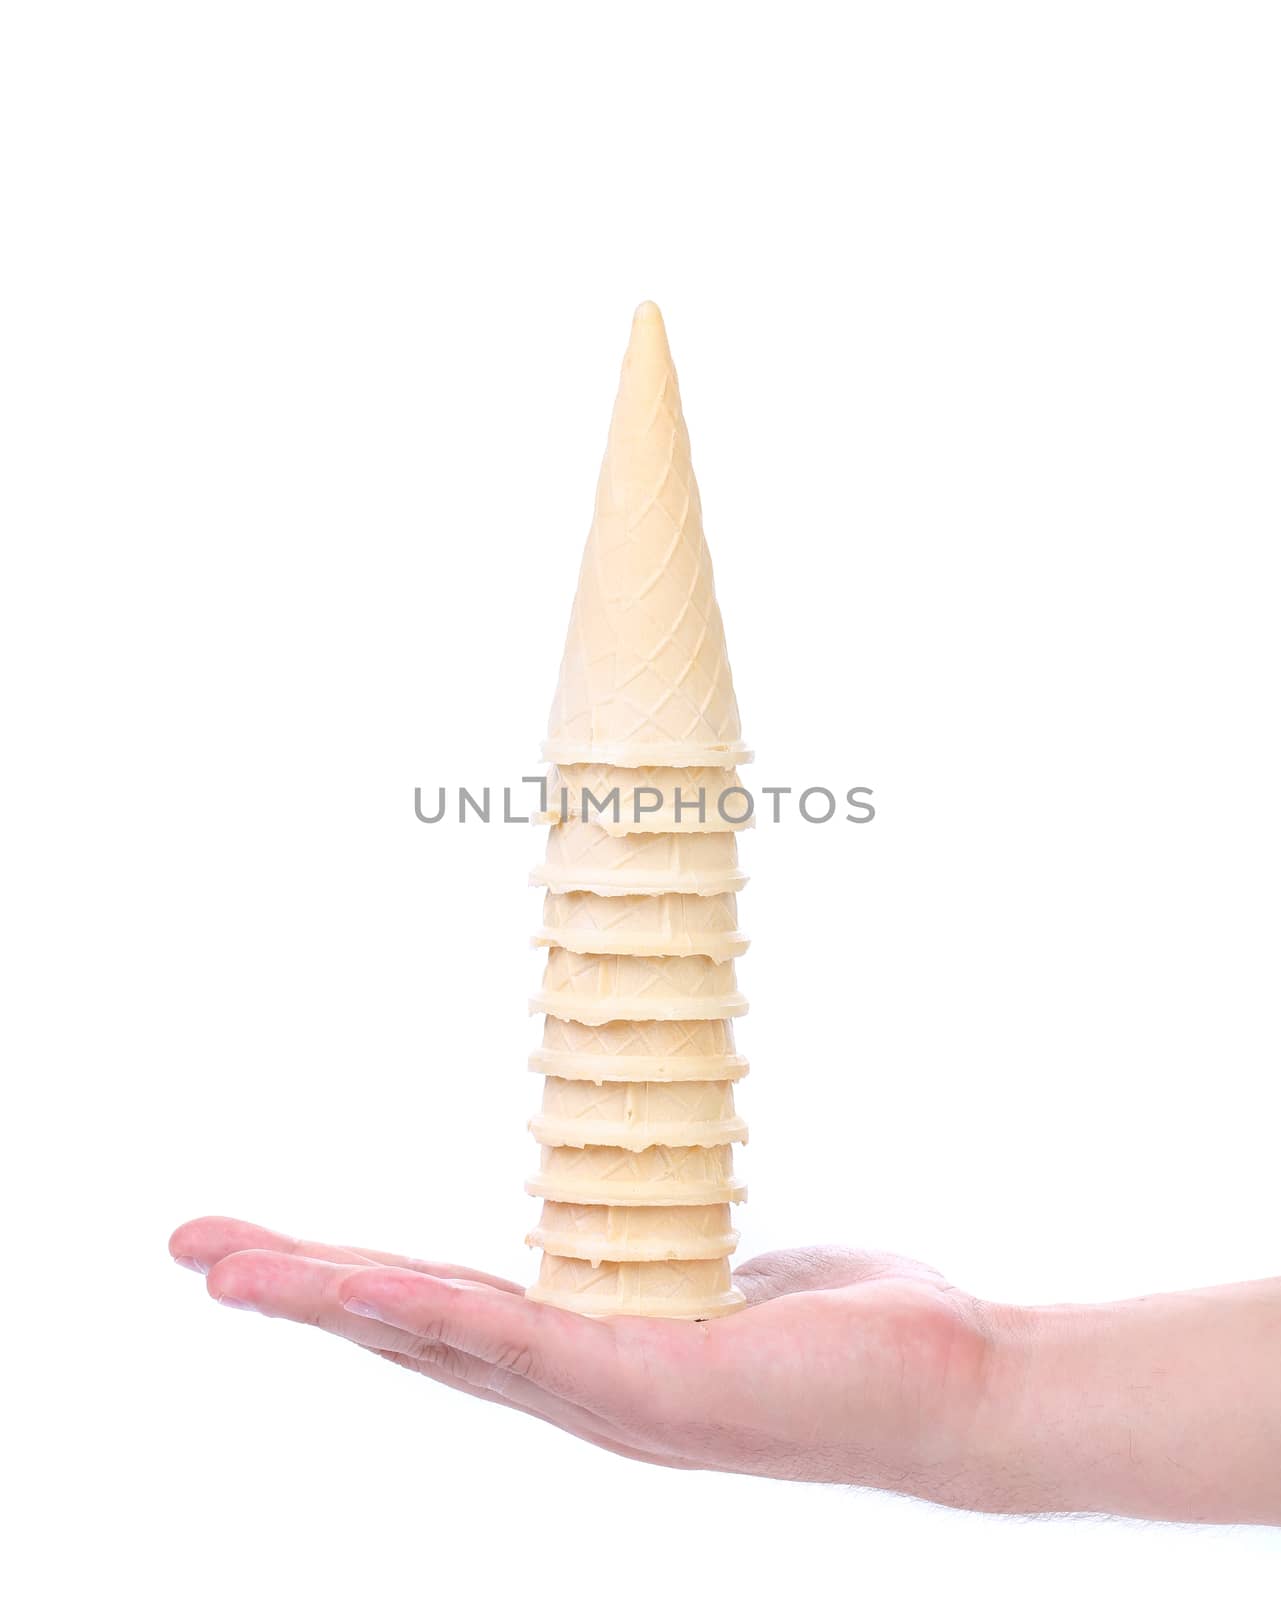 Hand hold stake of ice cream cones. White background.